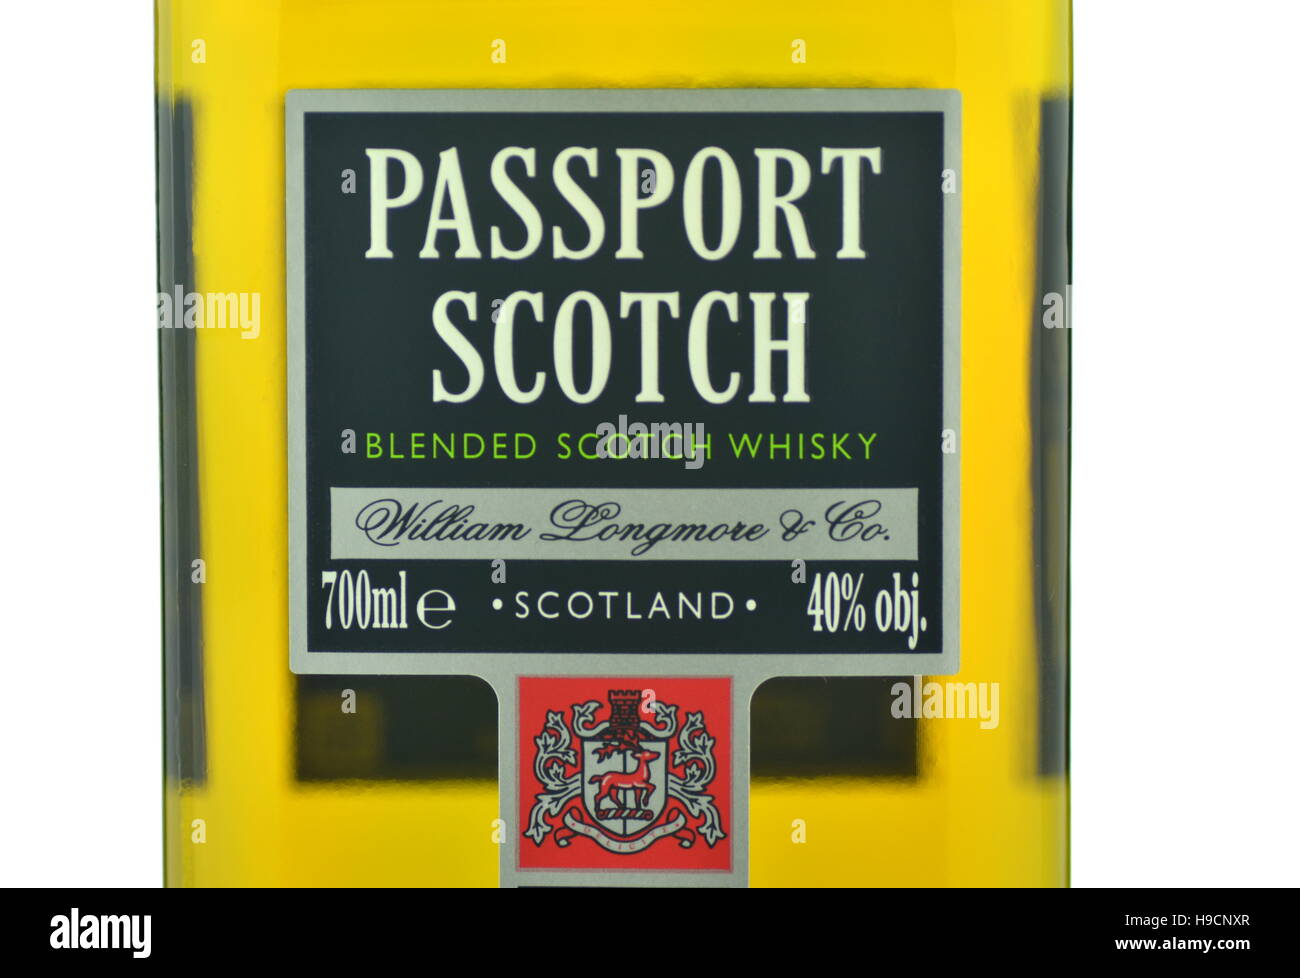 Passport Scotch blended whisky isolated on white background. Passport Scotch is a brand of whisky exported from Scotland by Seagram Distillers current Stock Photo